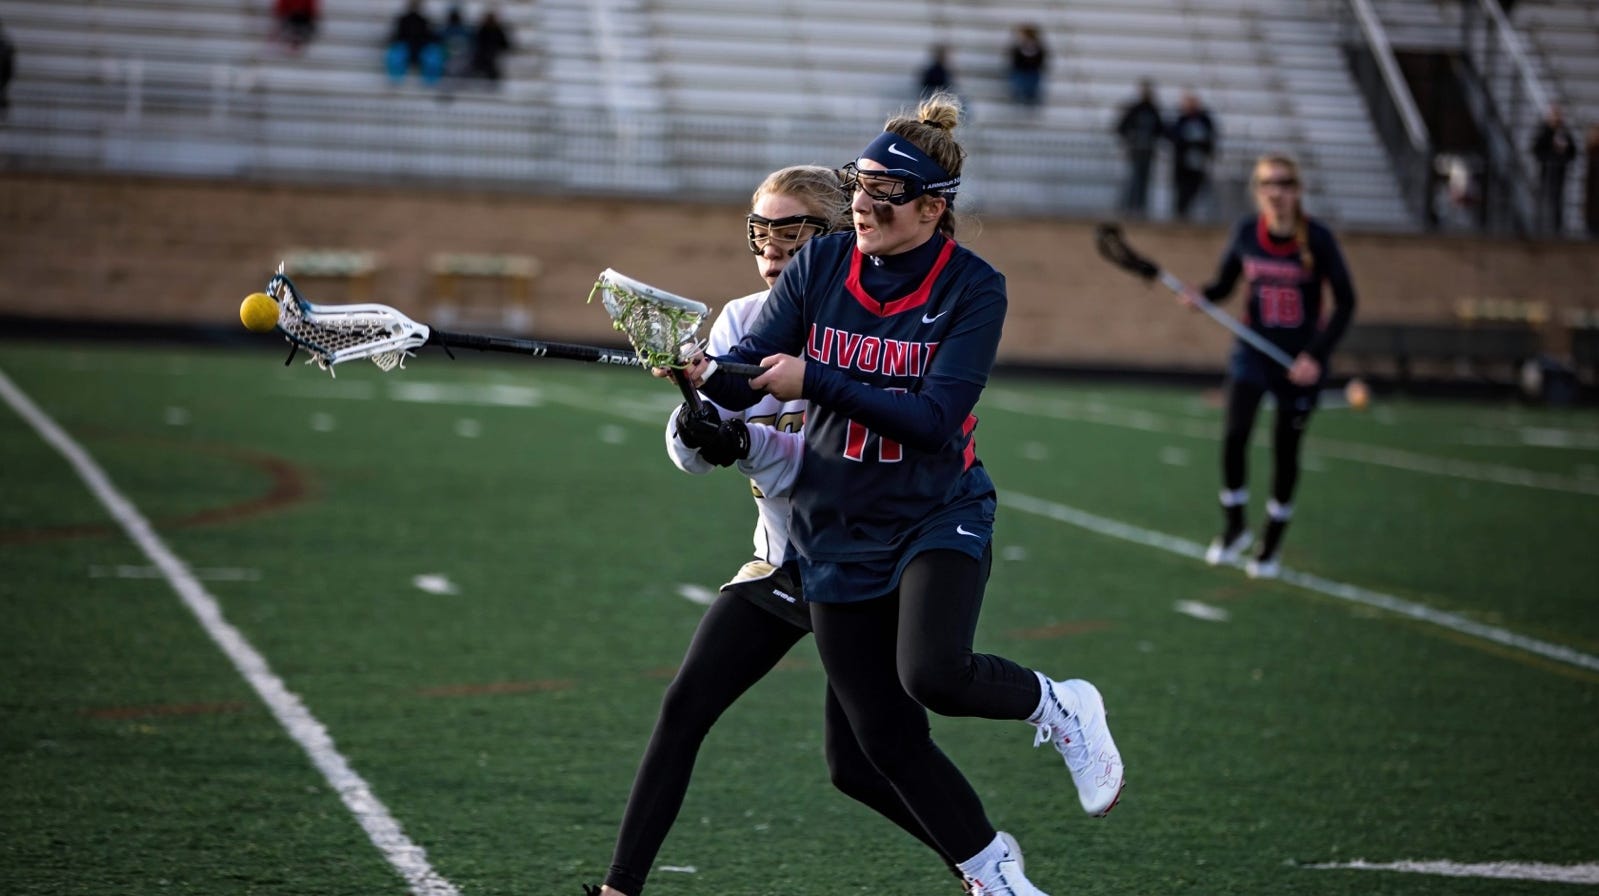 Livonia United's Maddy Champagne sets MHSAA lacrosse record